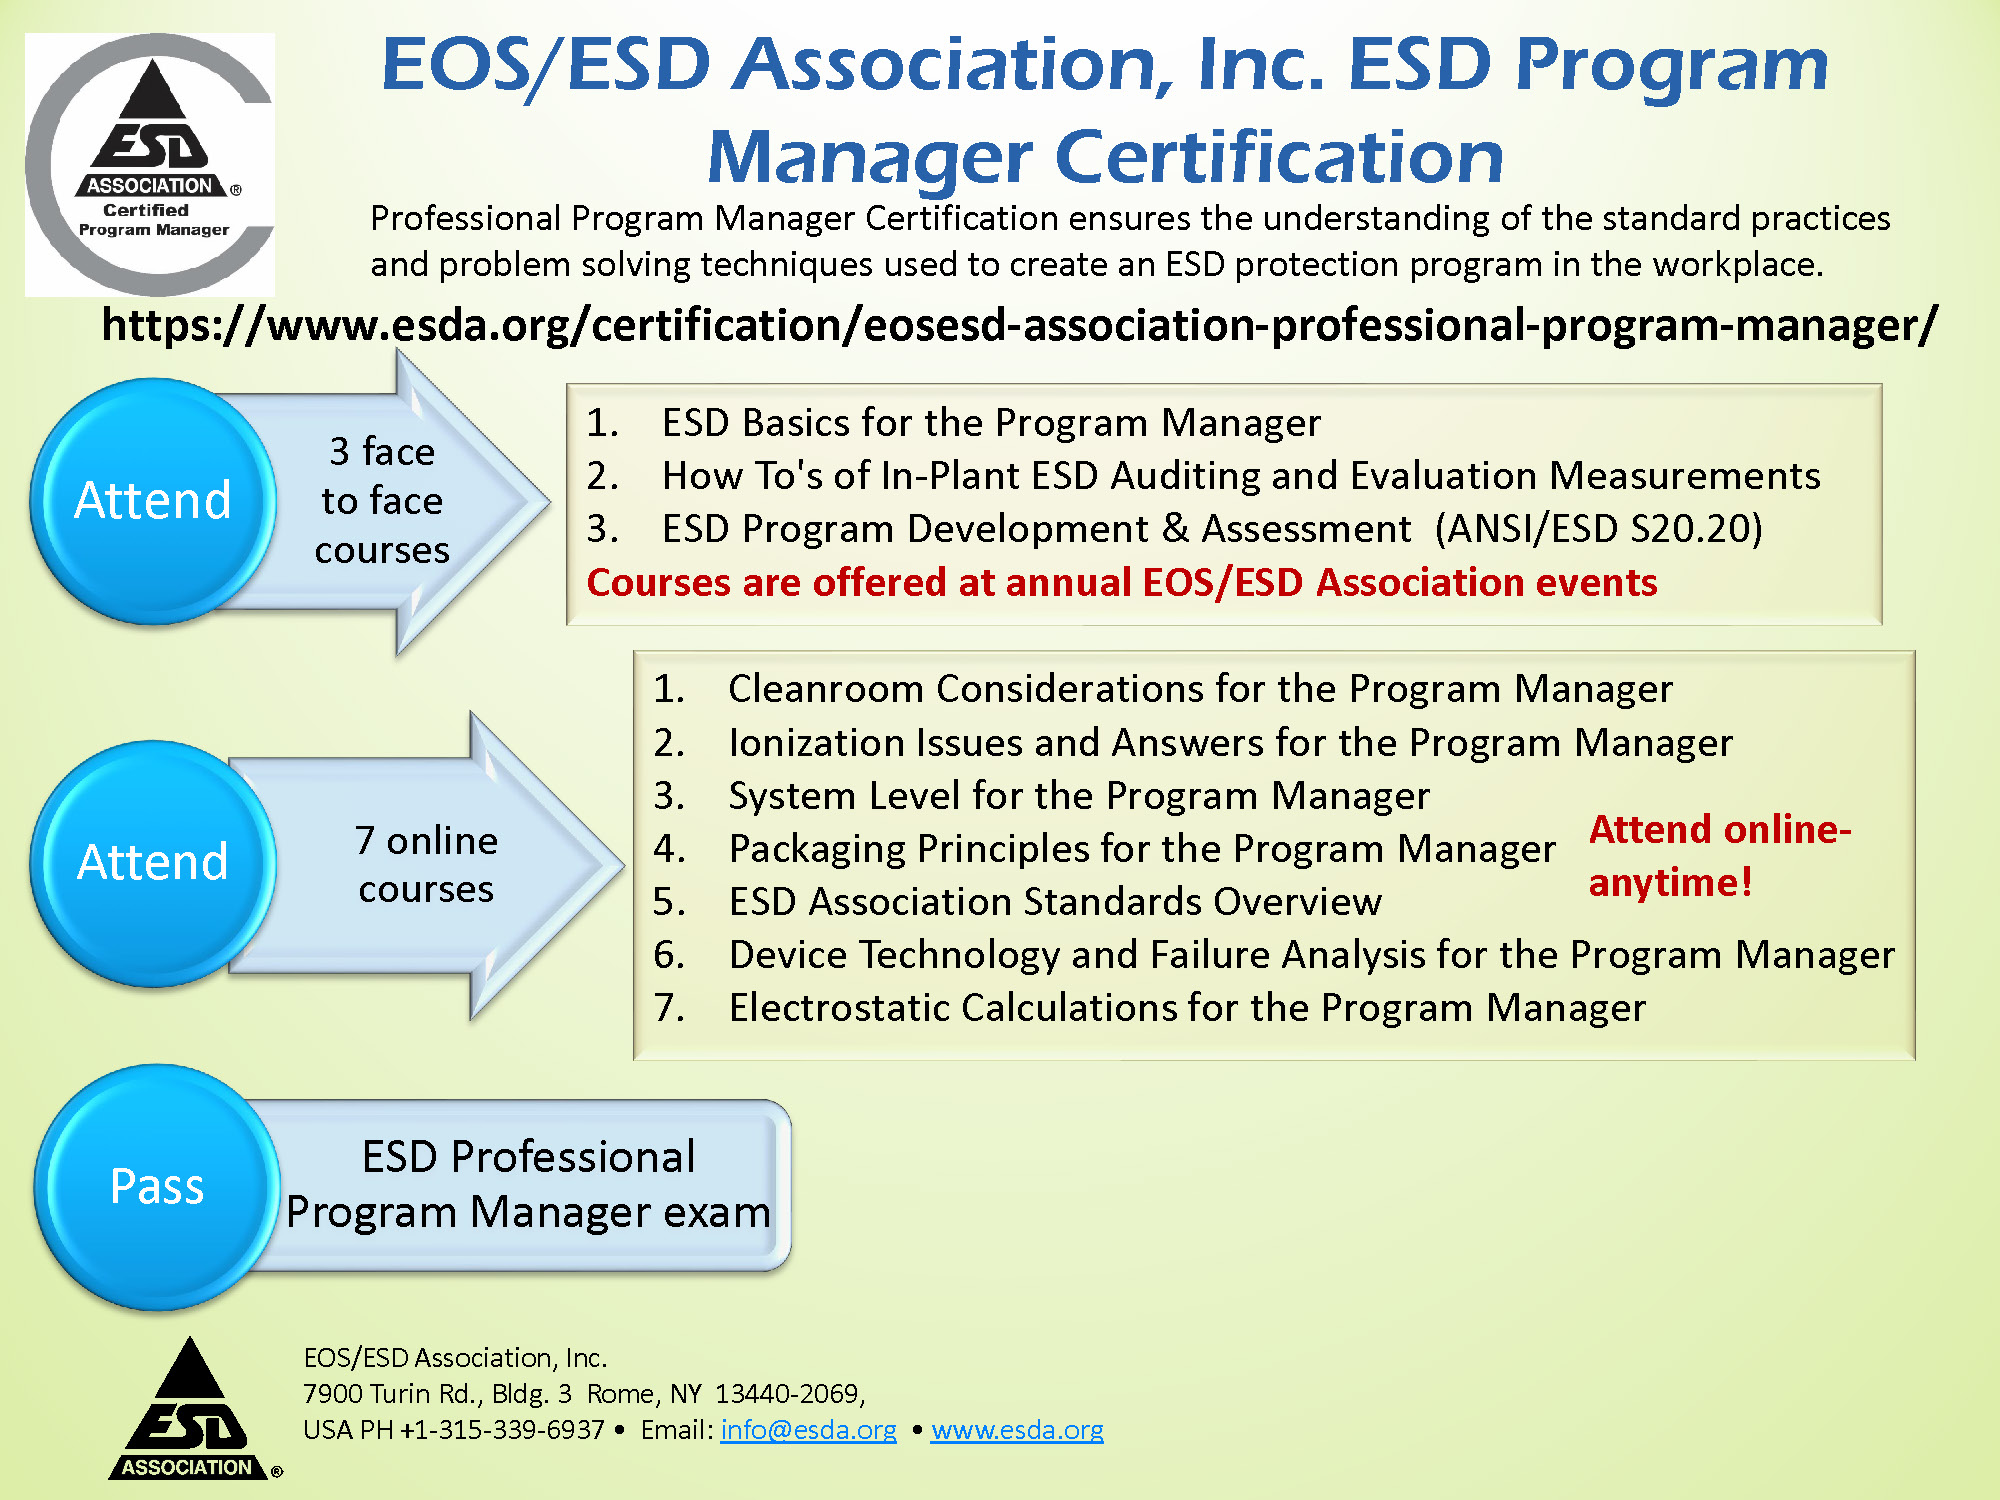 Esd Org Chart